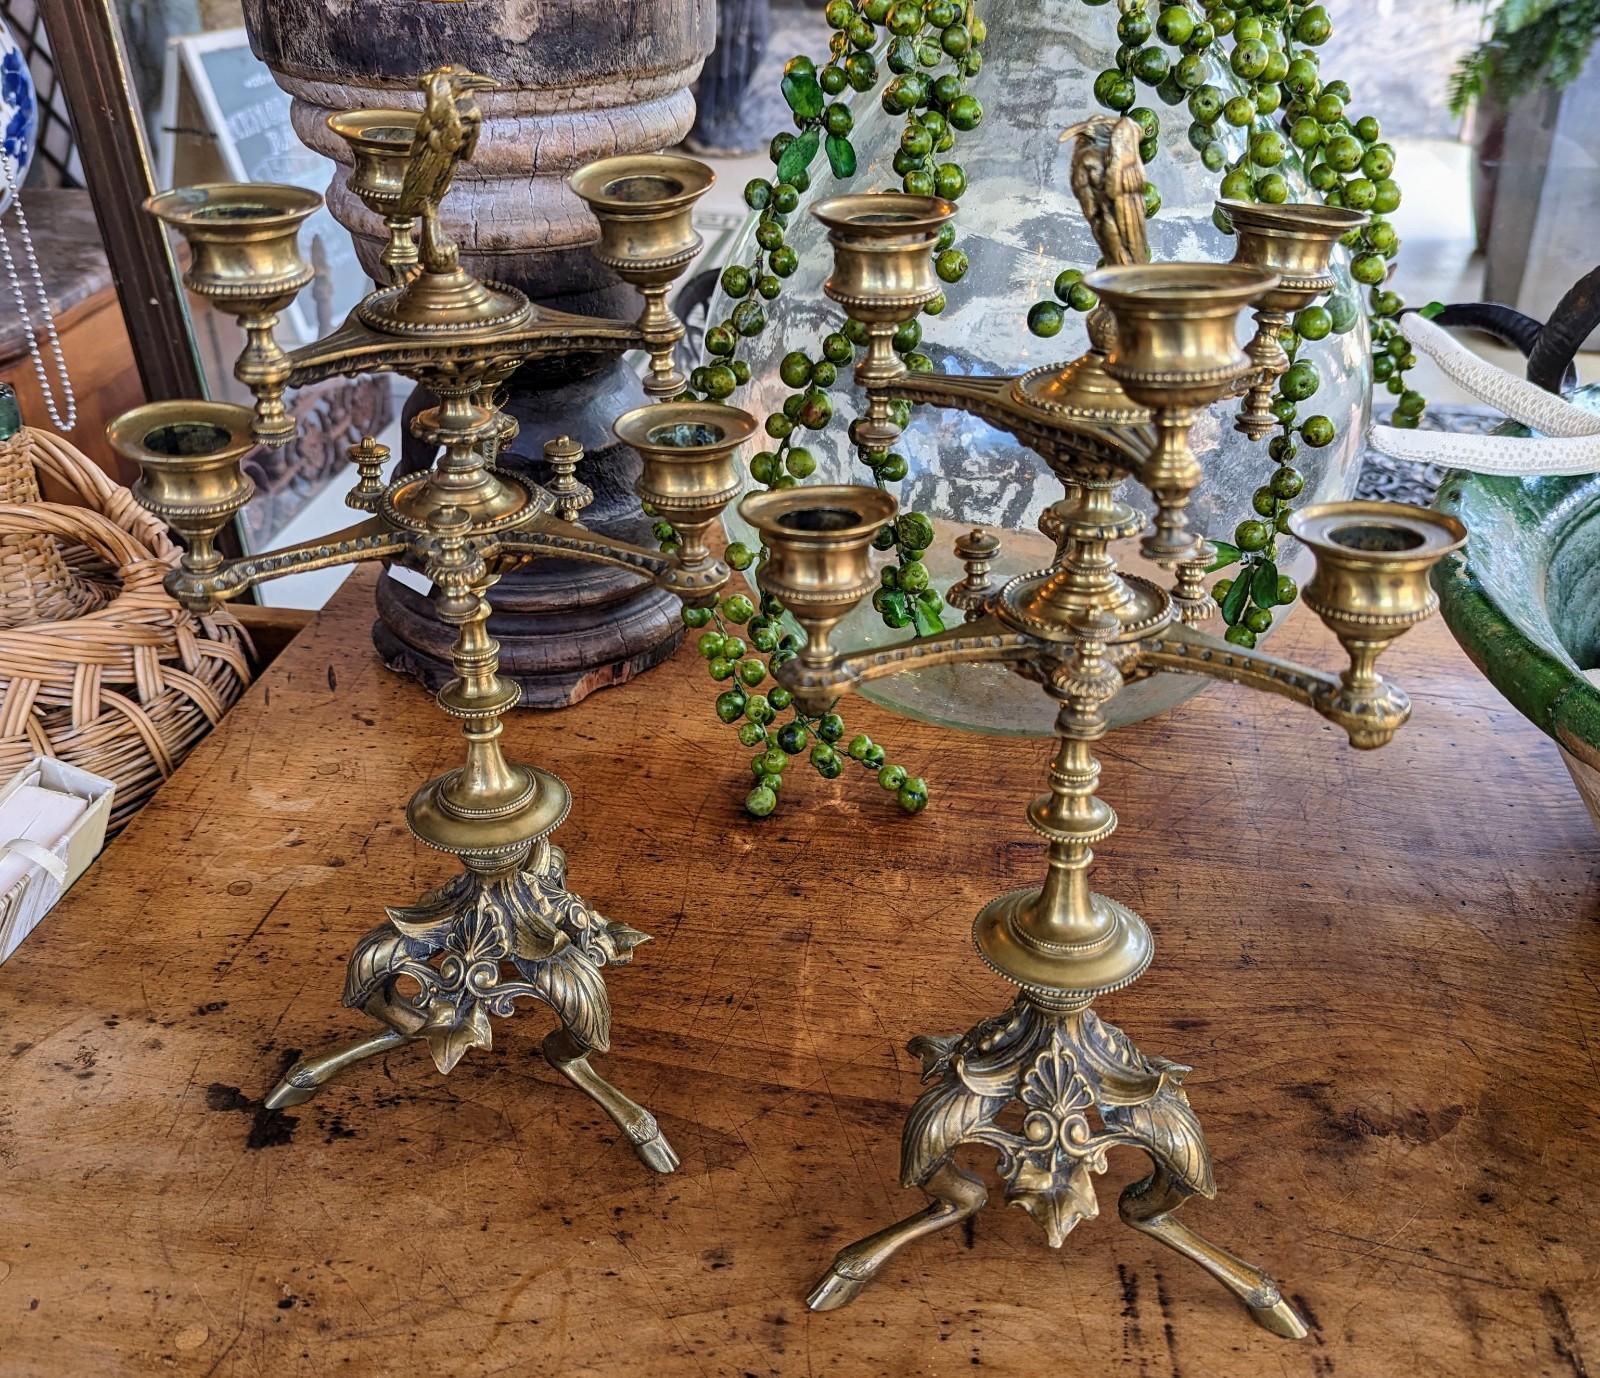 Pair of Antique Candelabras, 19th Century European Brass Candlesticks Footed For Sale 6